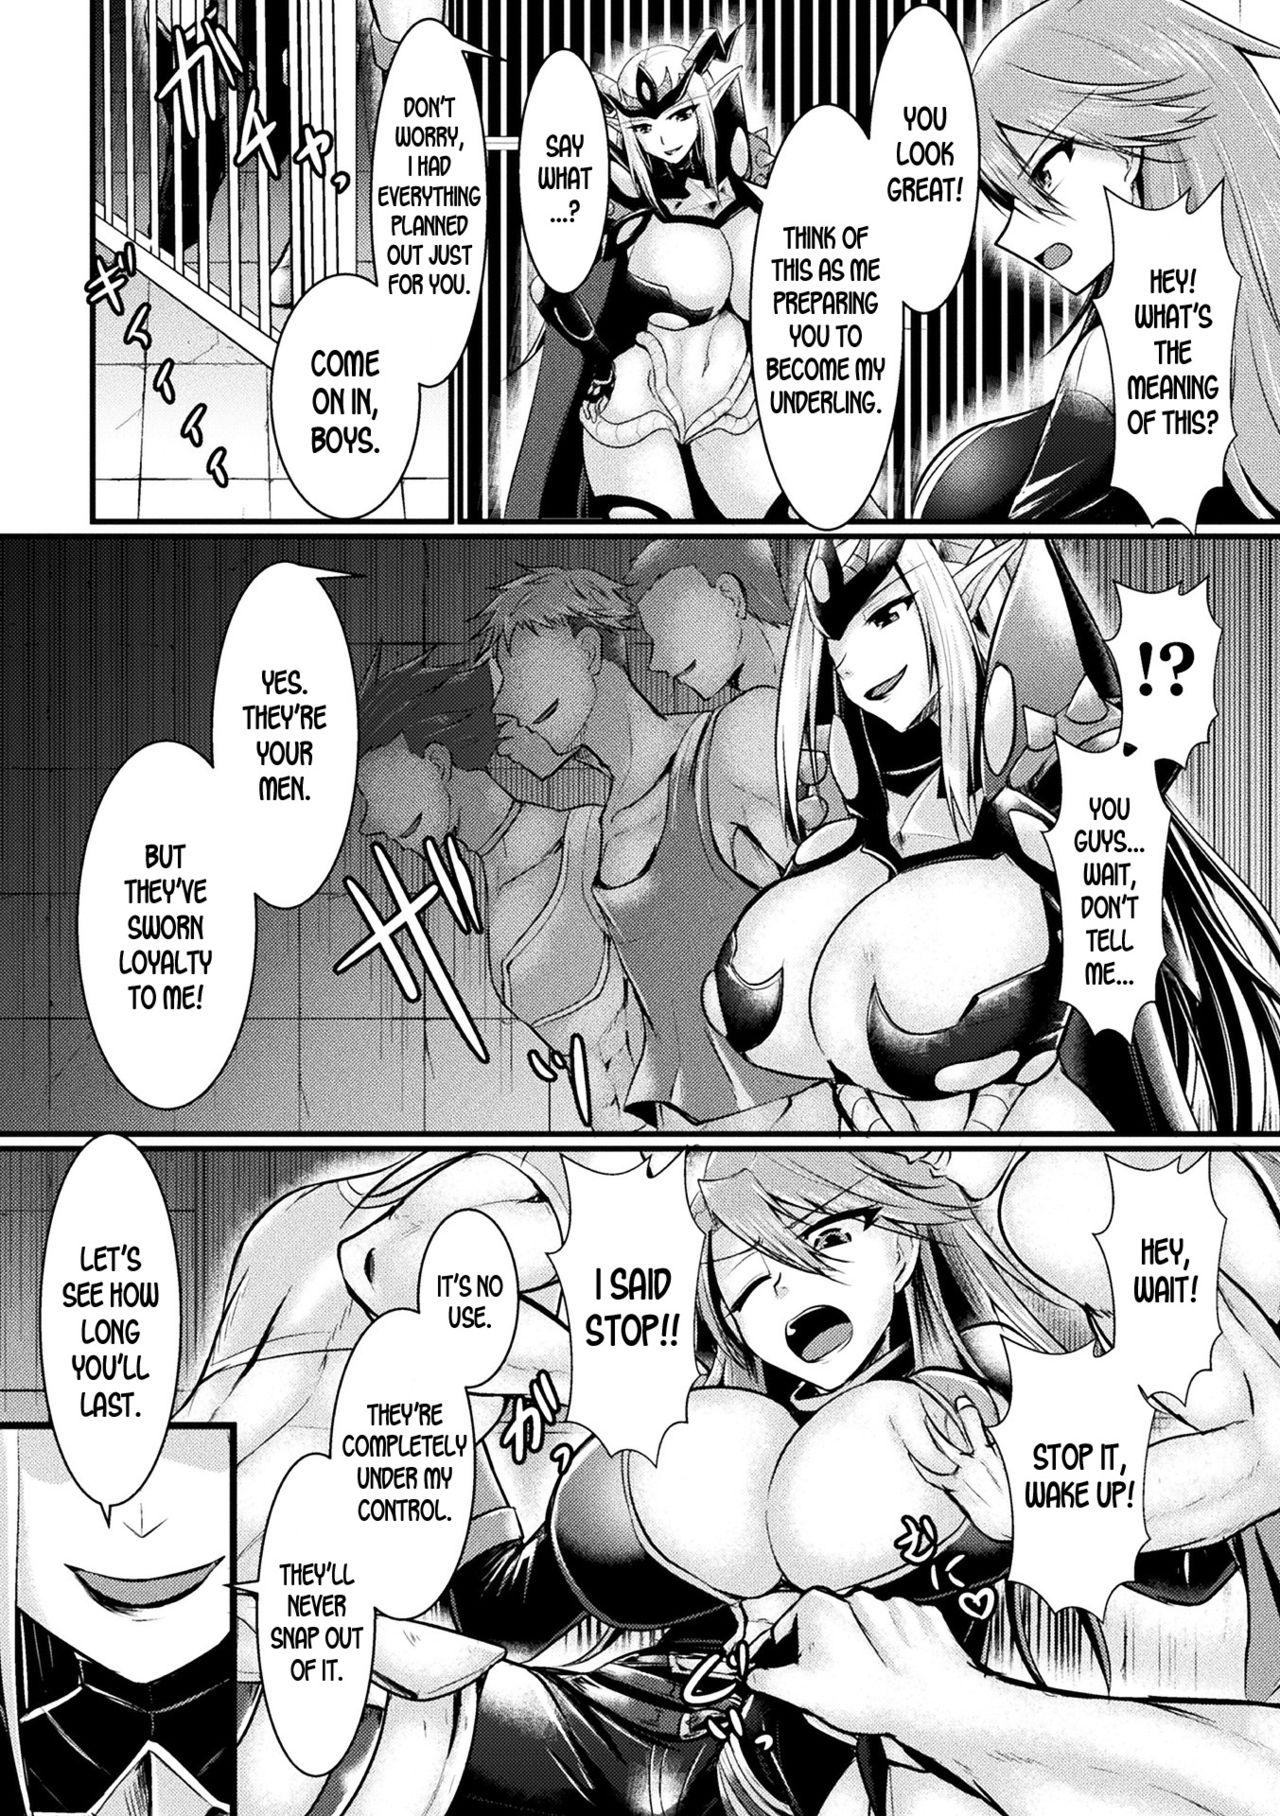 Cheerleader The Kingdom's Downfall Shemale Sex - Page 5